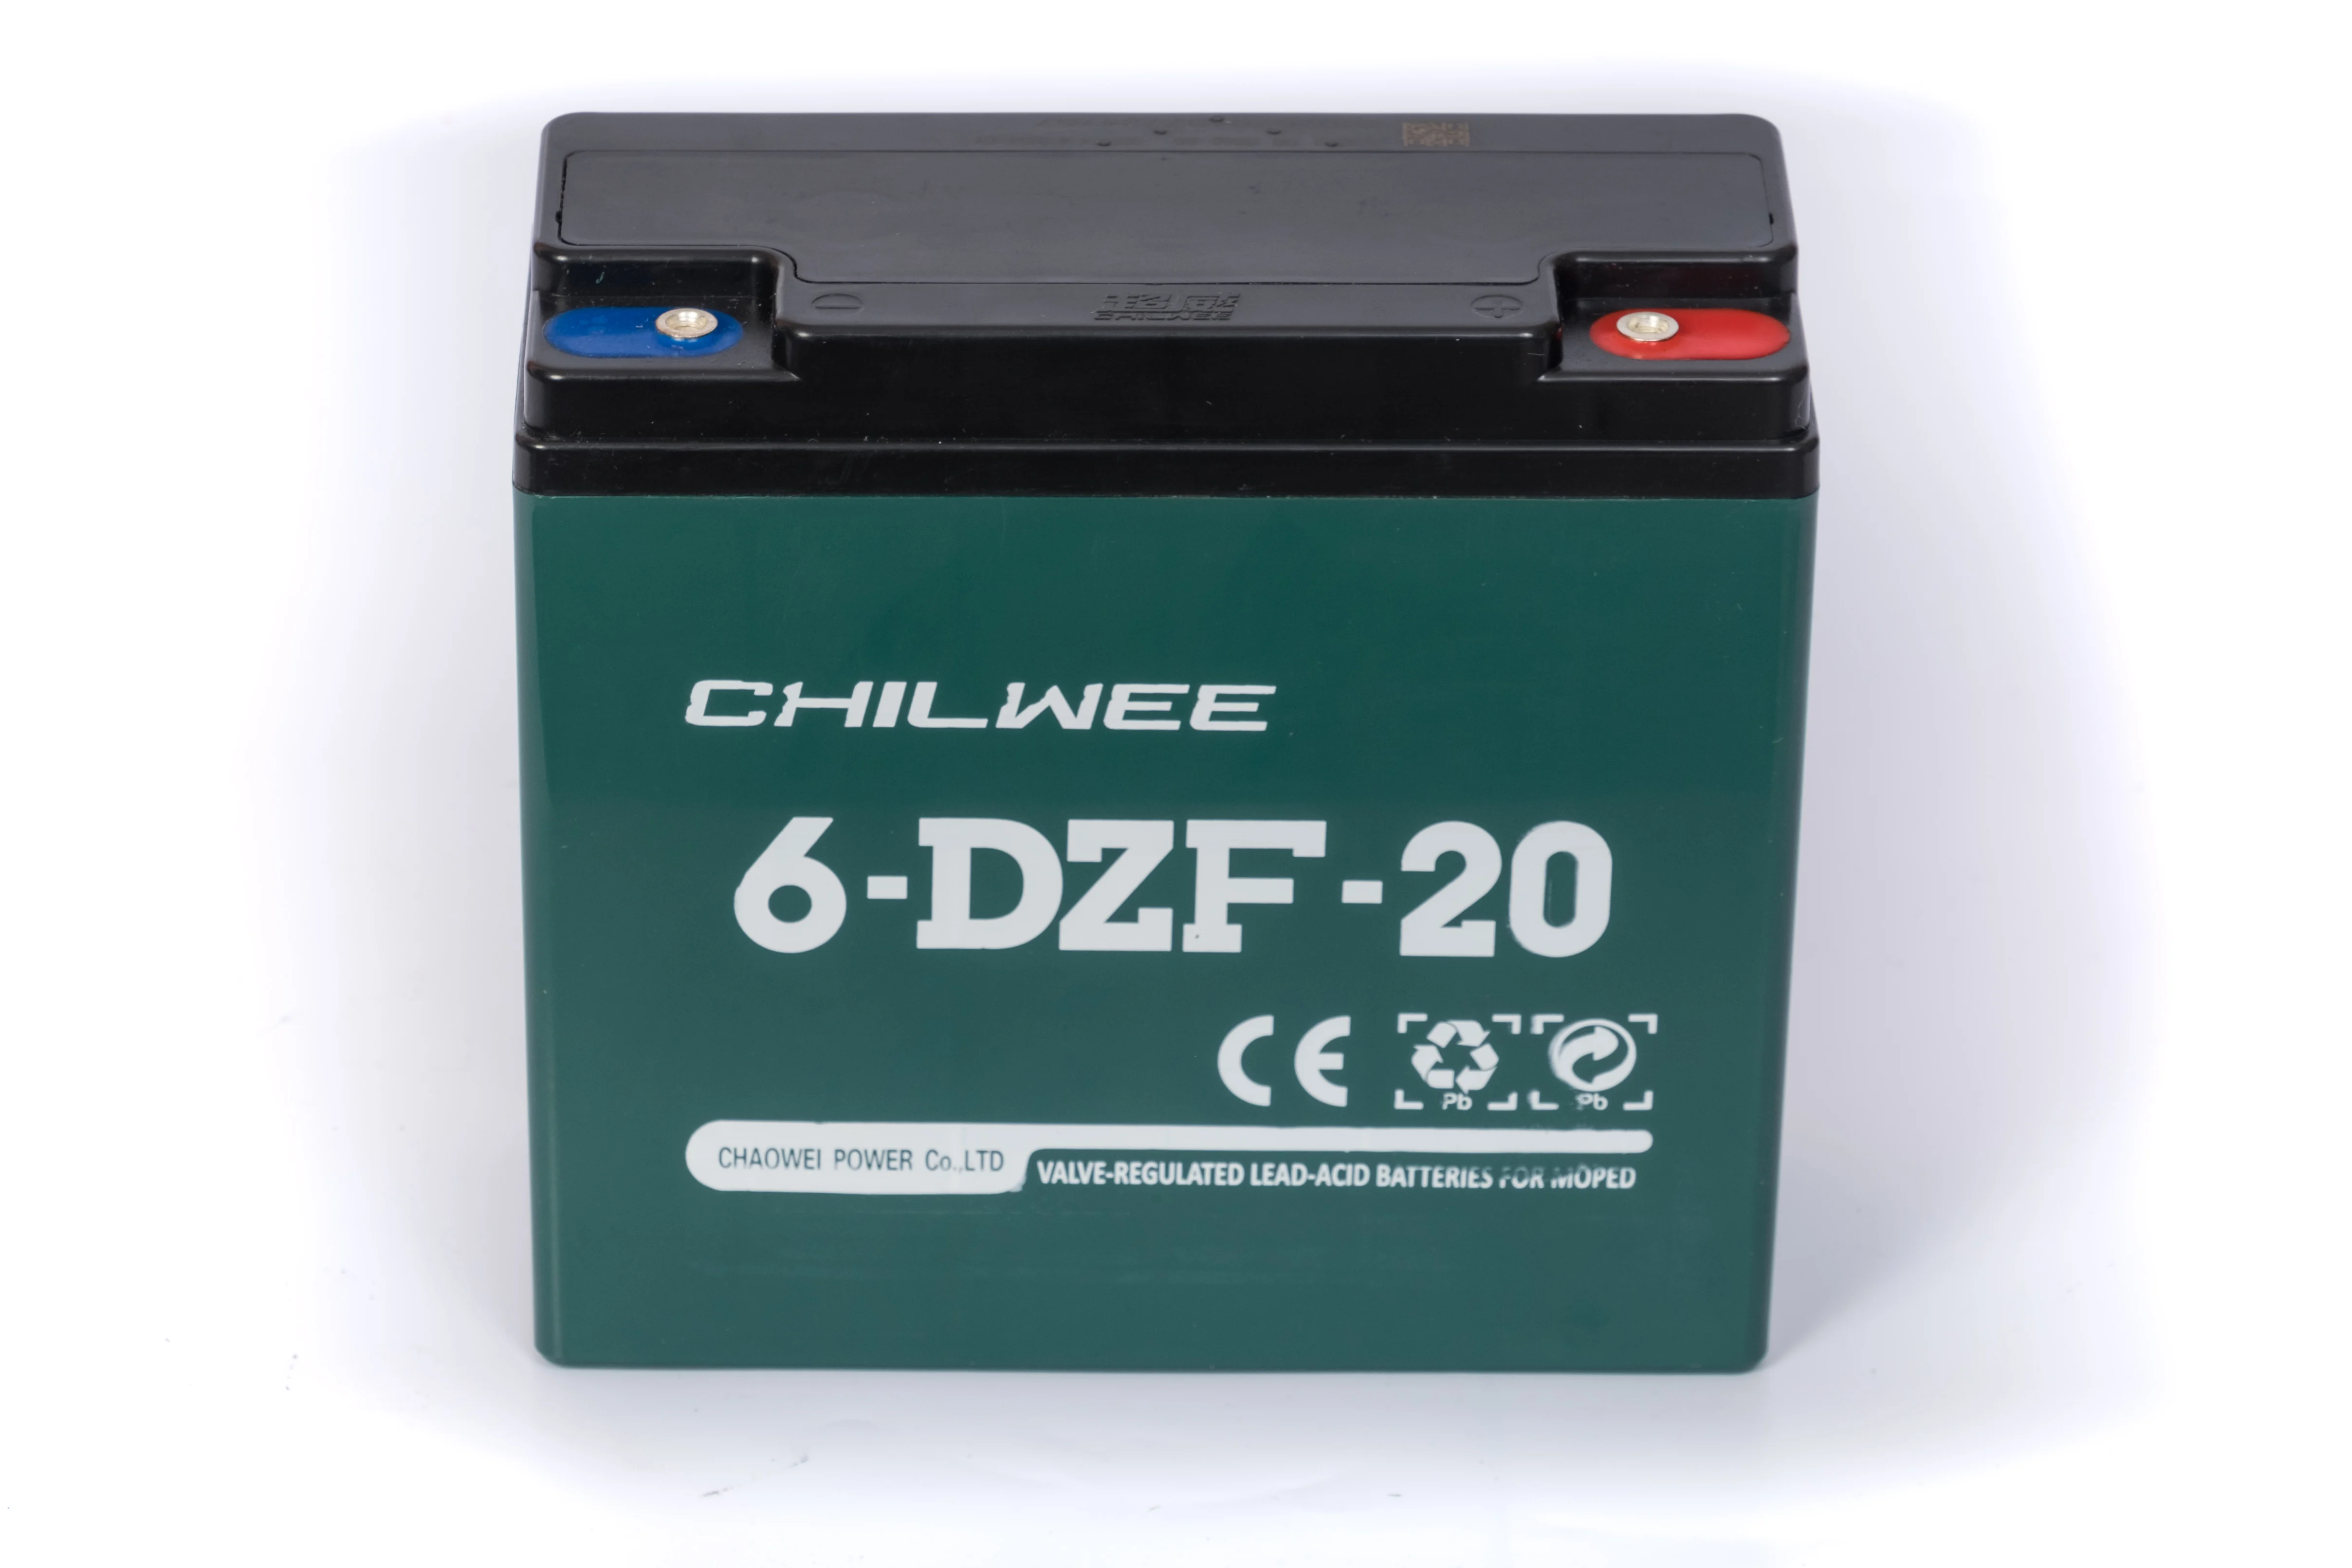 Rechargeable Battery Chilwee 6-dzm-20 (dzf) - Rechargeable Batteries -  AliExpress